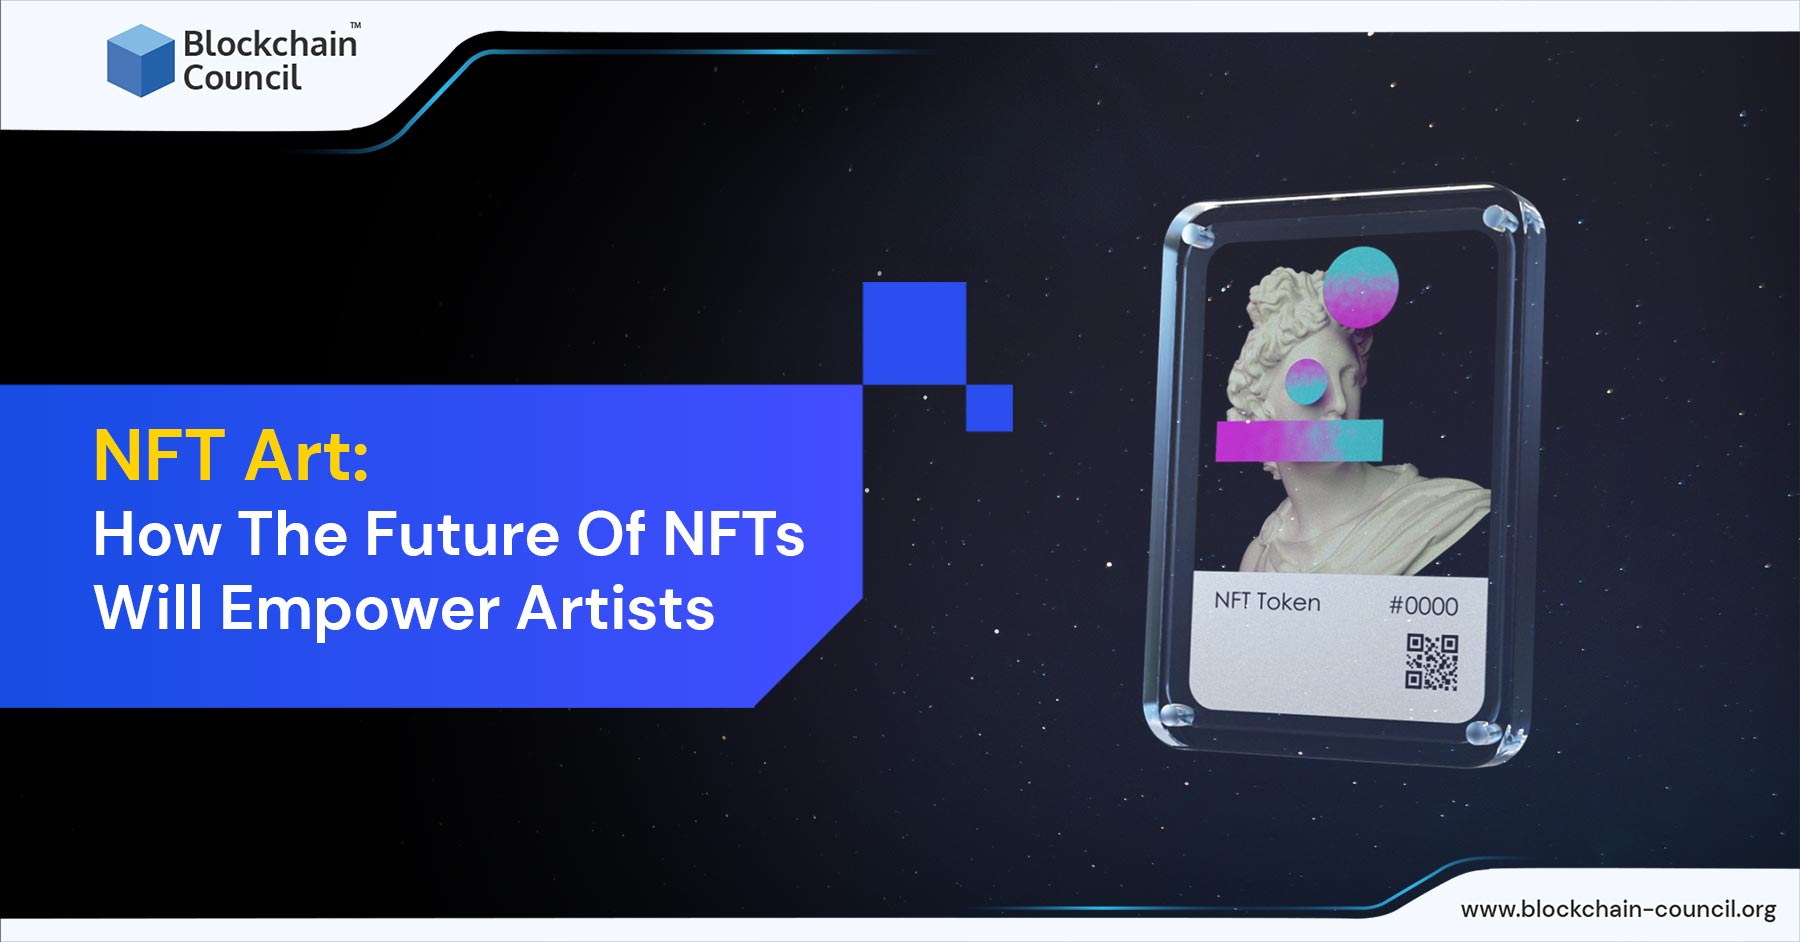 NFT Art: How the Future of NFTs will Empower Artists